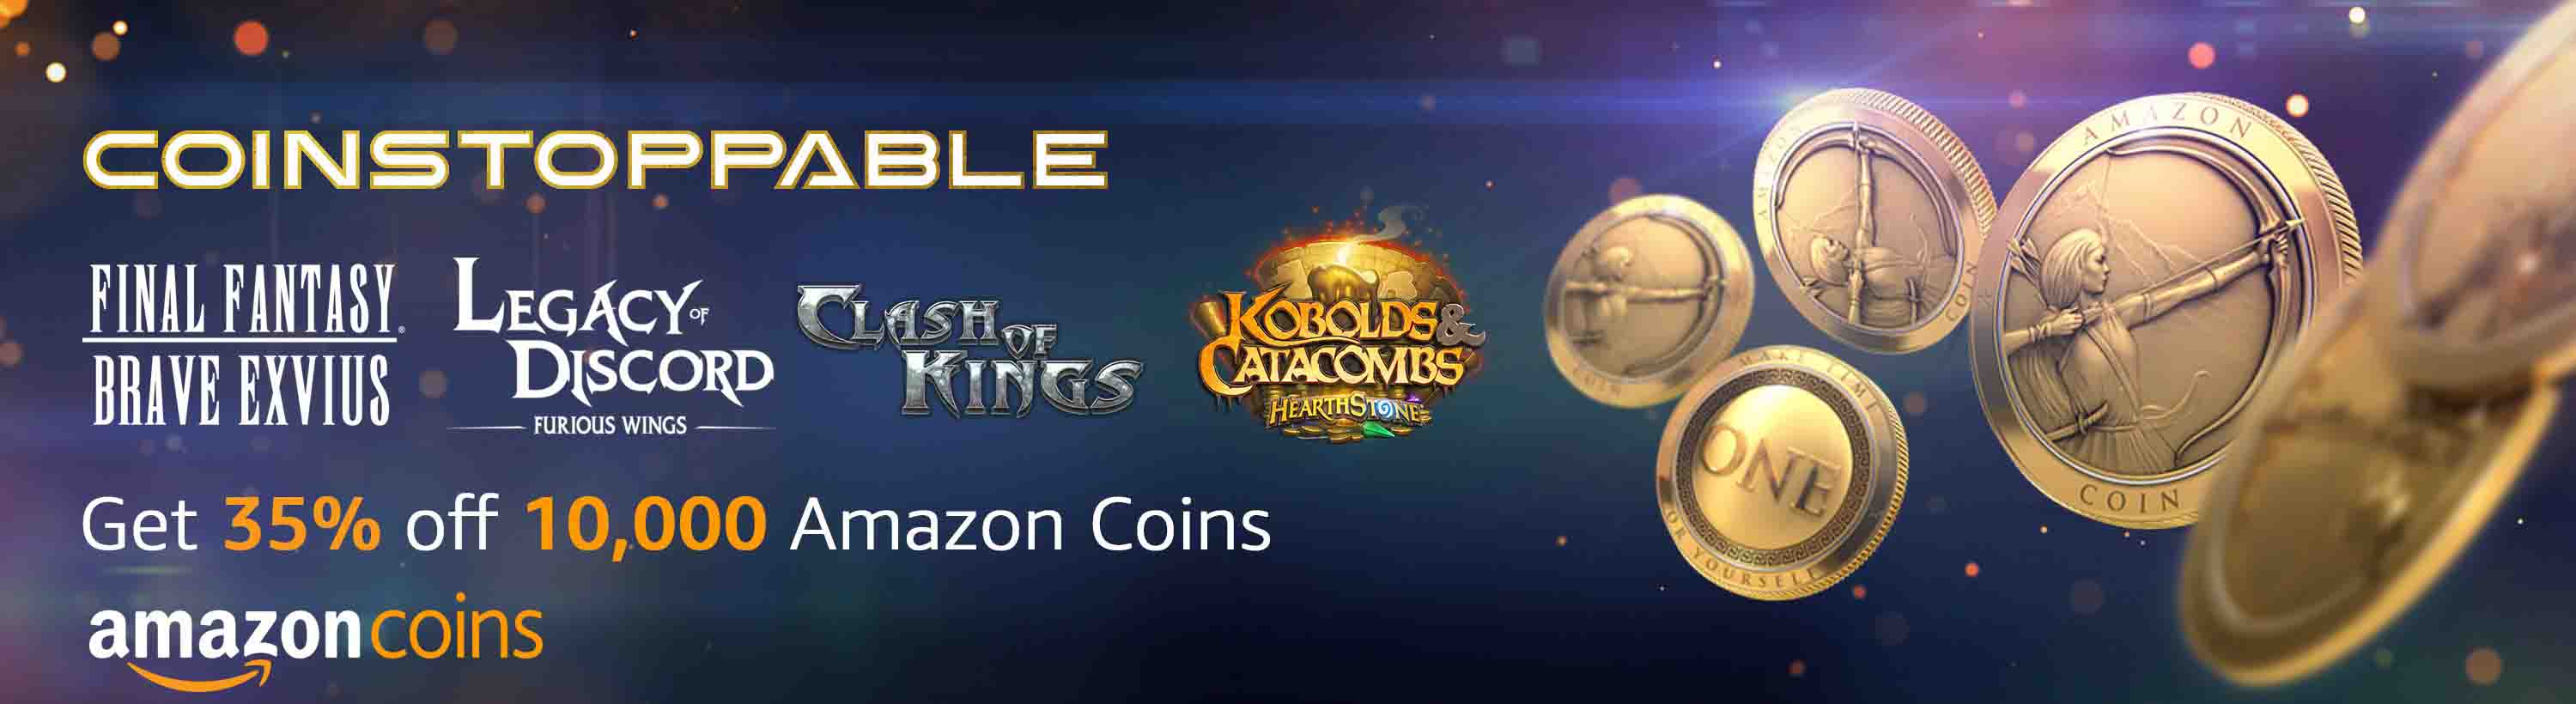 coinstoppable-promo-code-tooewnzgko3-for-35-off-10-000-amazon-coins